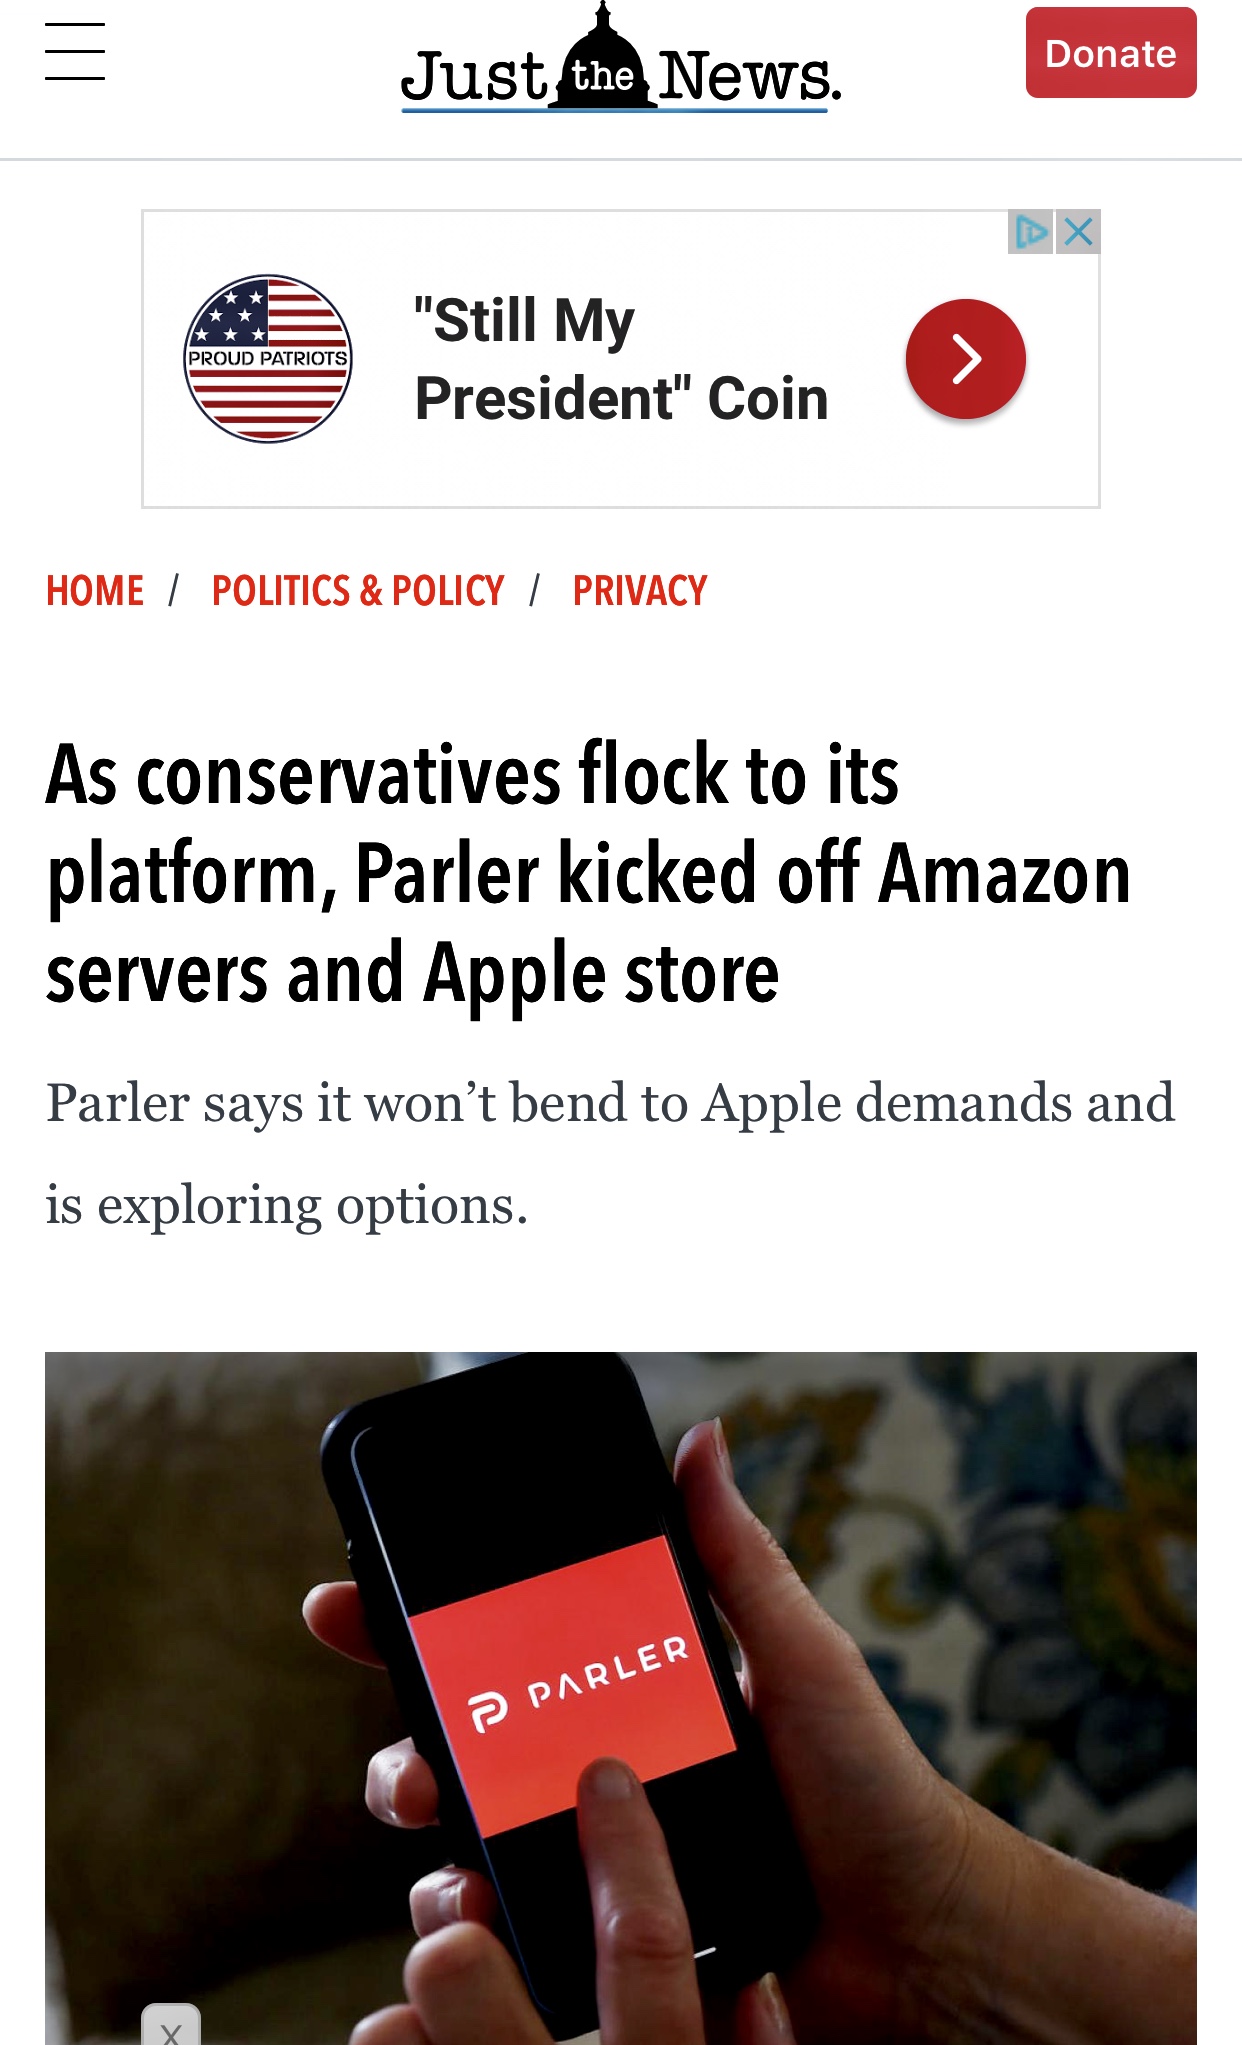 As conservatives flock to its platform, Parler kicked off Amazon servers and Apple store